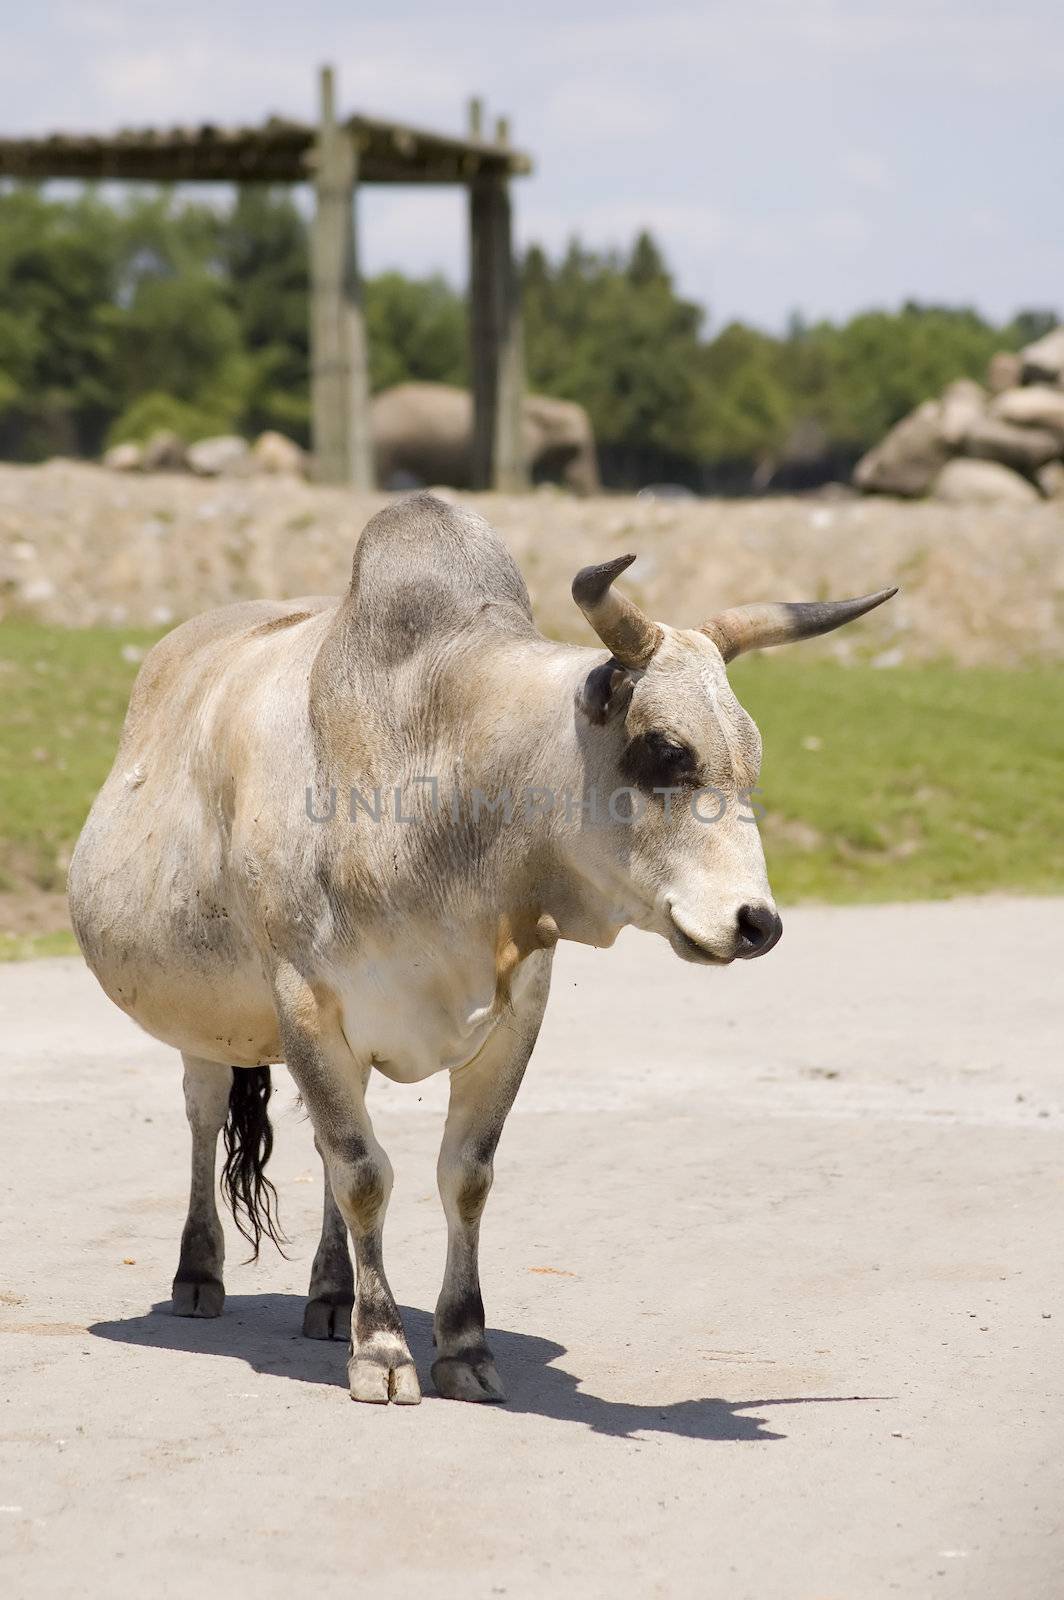 Close-up view of a zebu in the zoo